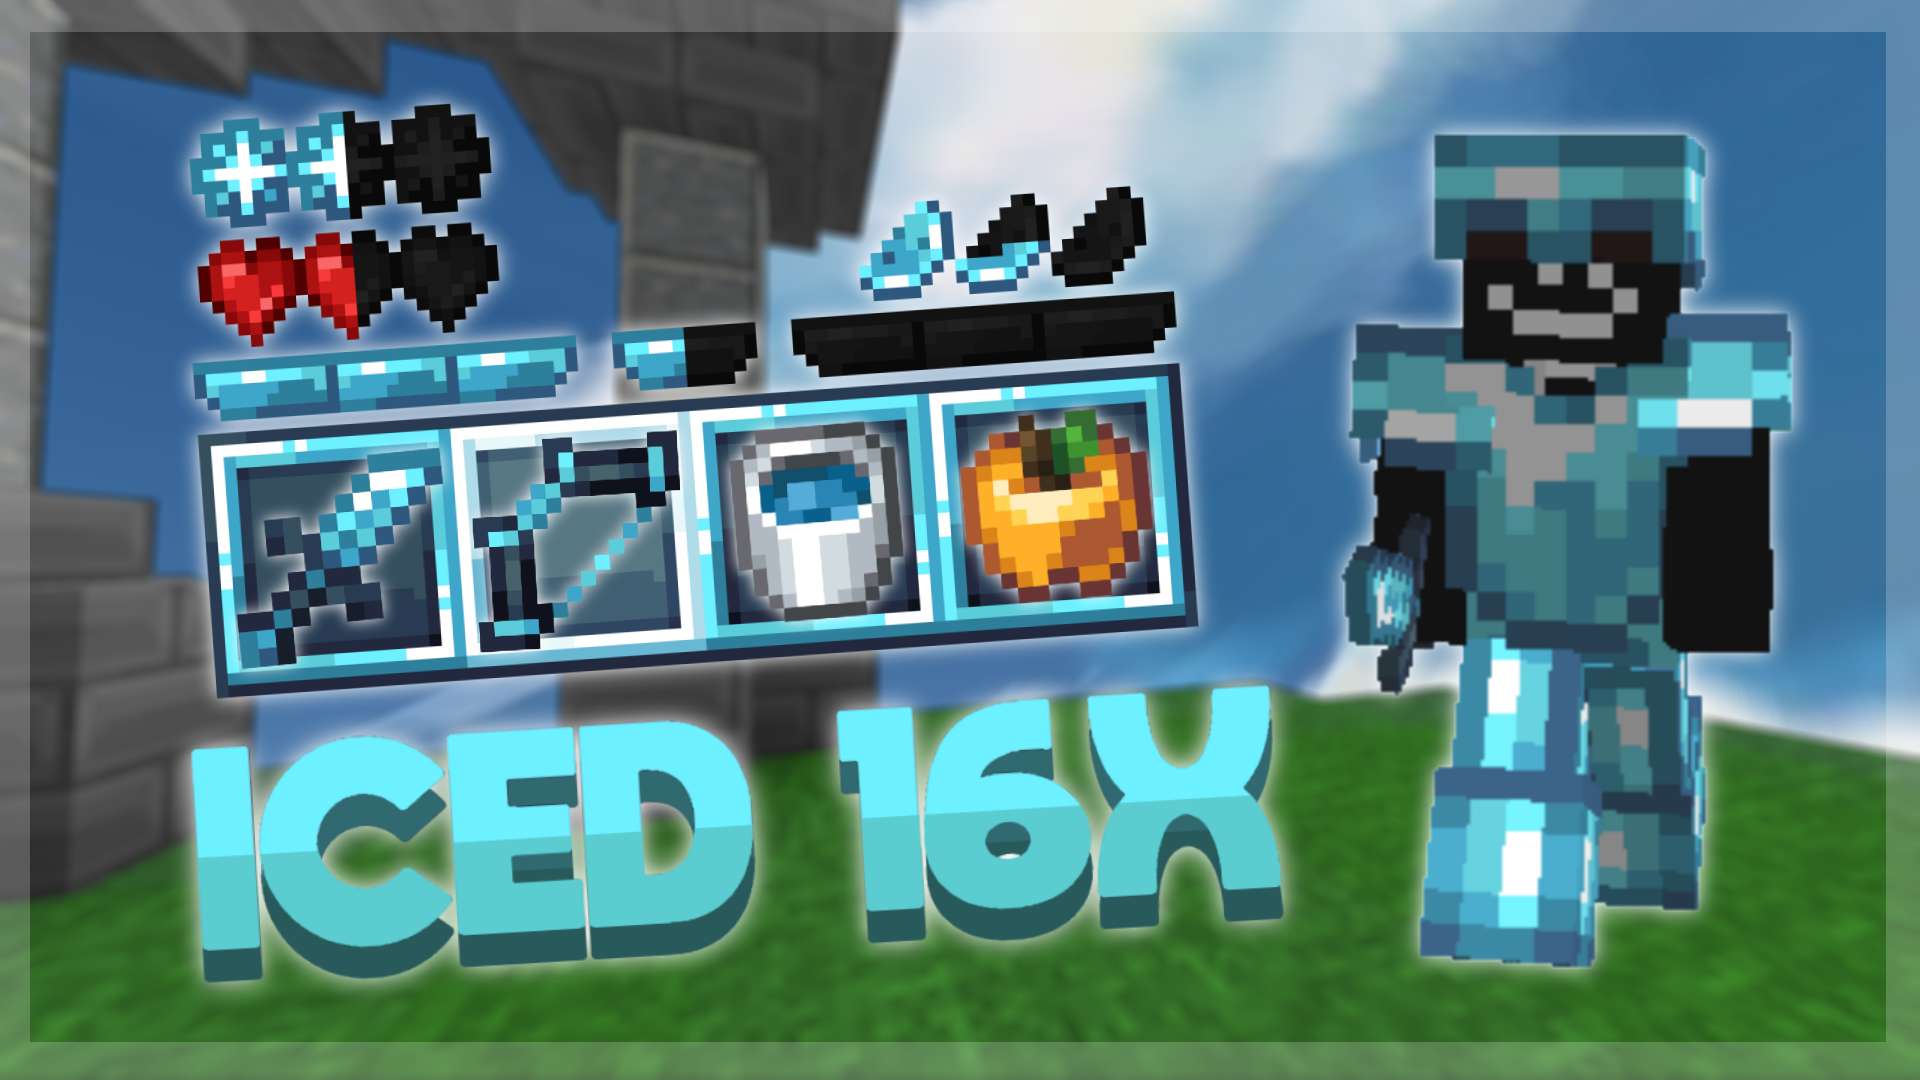 Iced 16x 16x by Bedwur & Rh56 on PvPRP